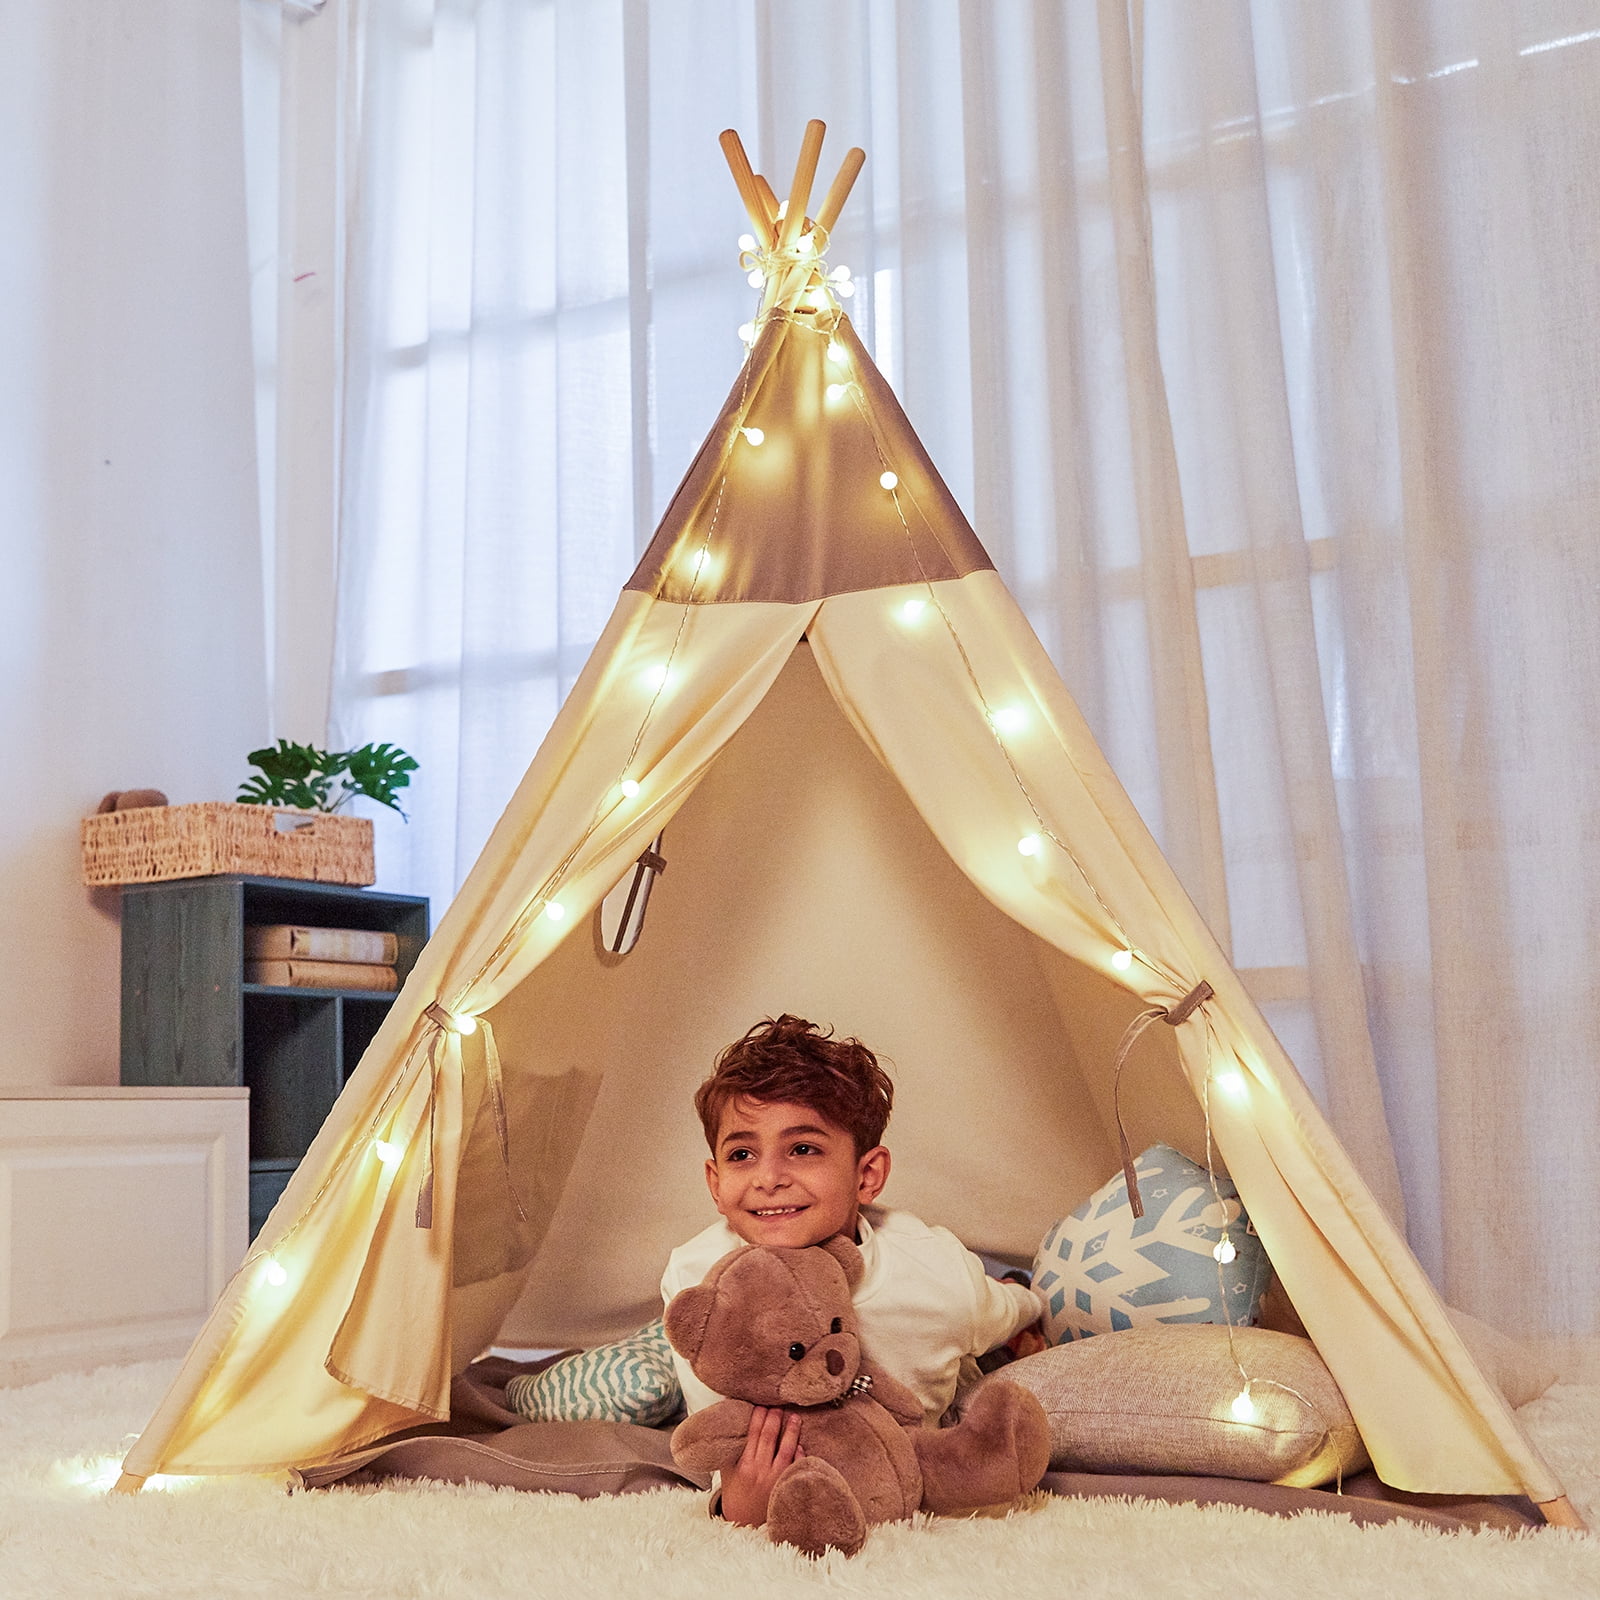 Blanket and Basket little dove Teepee Tent for Kids Foldable Teepee Play Tent with Pillow Four Poles Style Raw White Color Fairy Lights Banner 